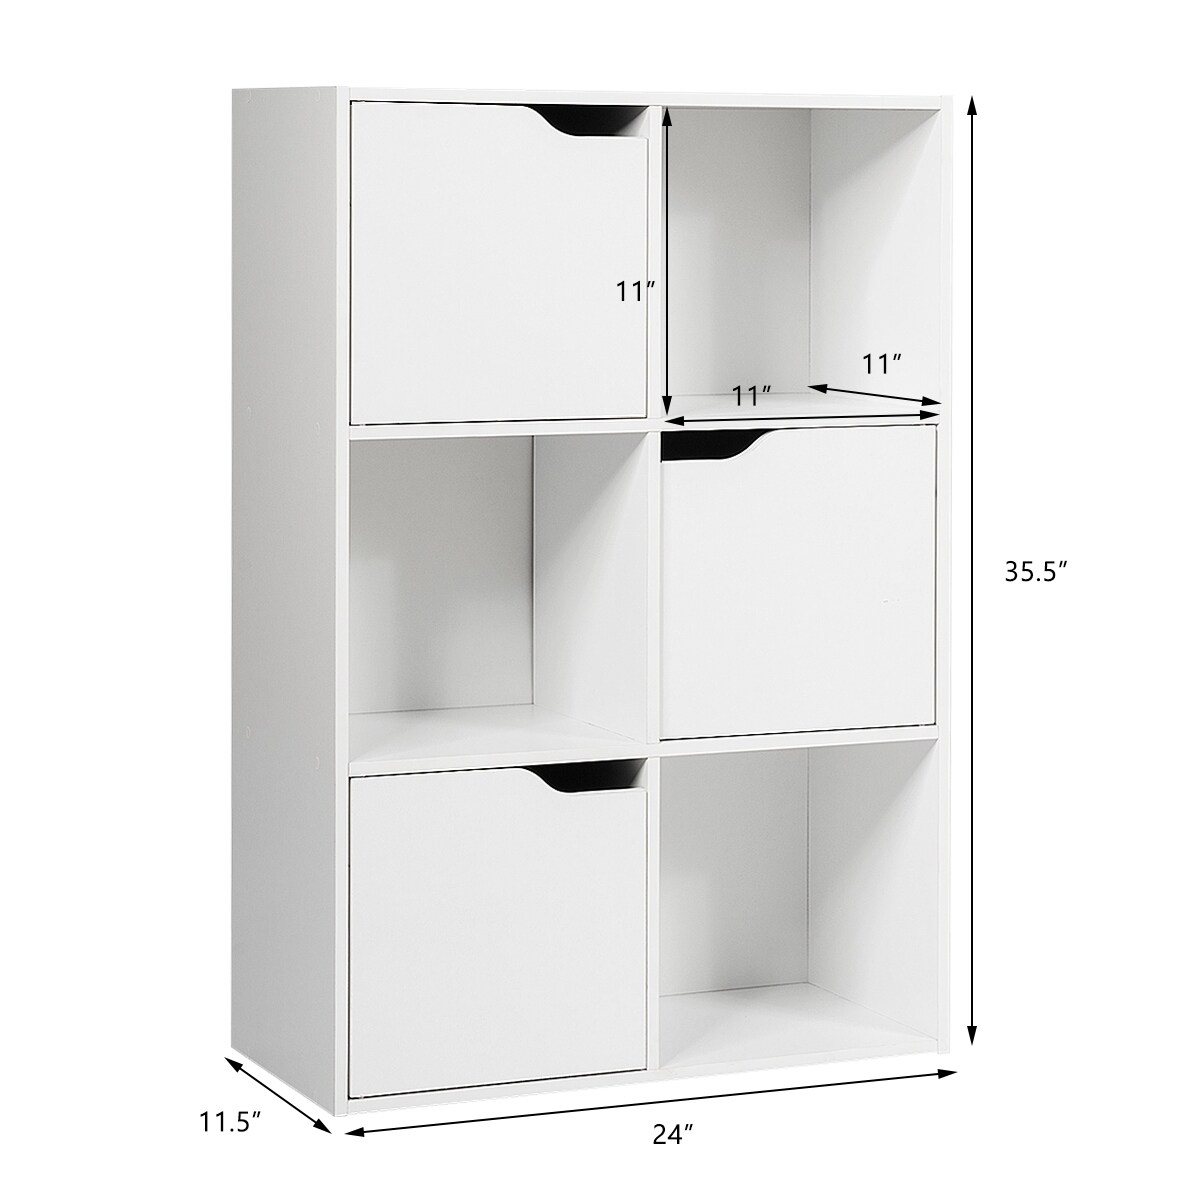 https://ak1.ostkcdn.com/images/products/is/images/direct/3f7beb94b1b571fb31d8b3b95ea4f470b23317e7/Costway-6-Cube-Bookcase-Cabinet-Wood-Bookcase-Storage-Shelves-Room.jpg